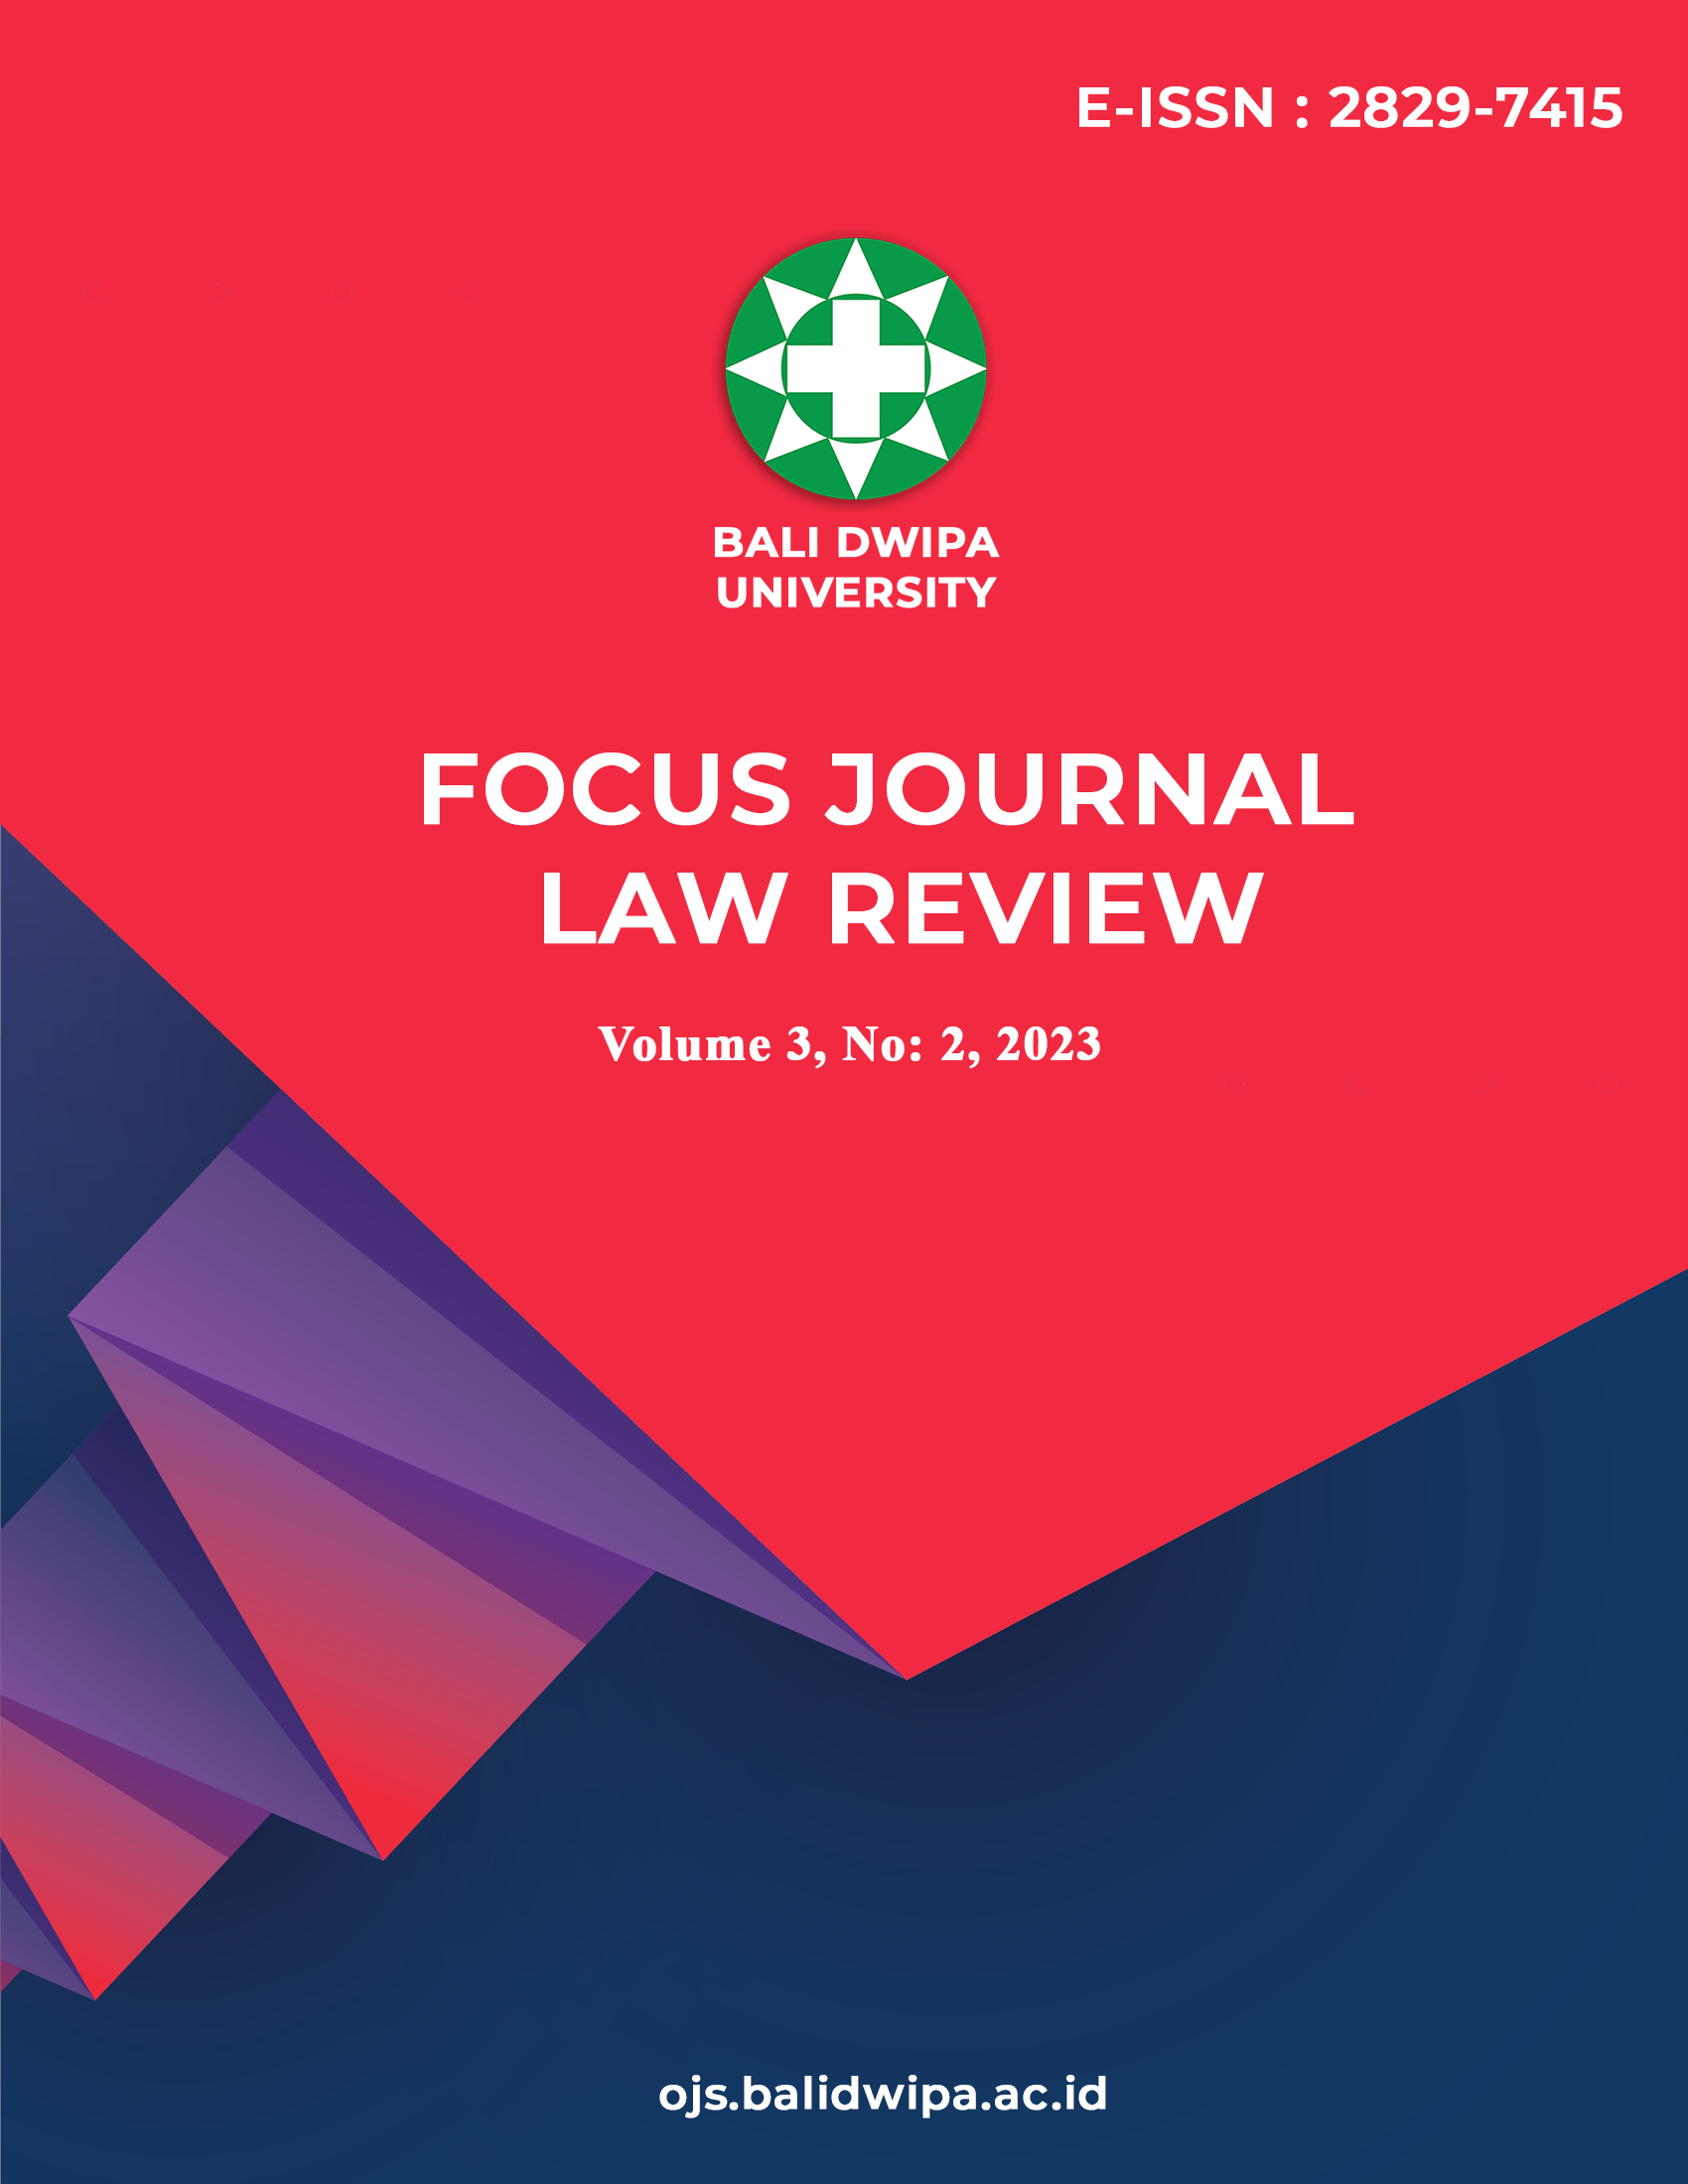 					View Vol. 3 No. 2 (2023): Focus Journal Law Review (Author: Philippines, Indonesia, France)
				